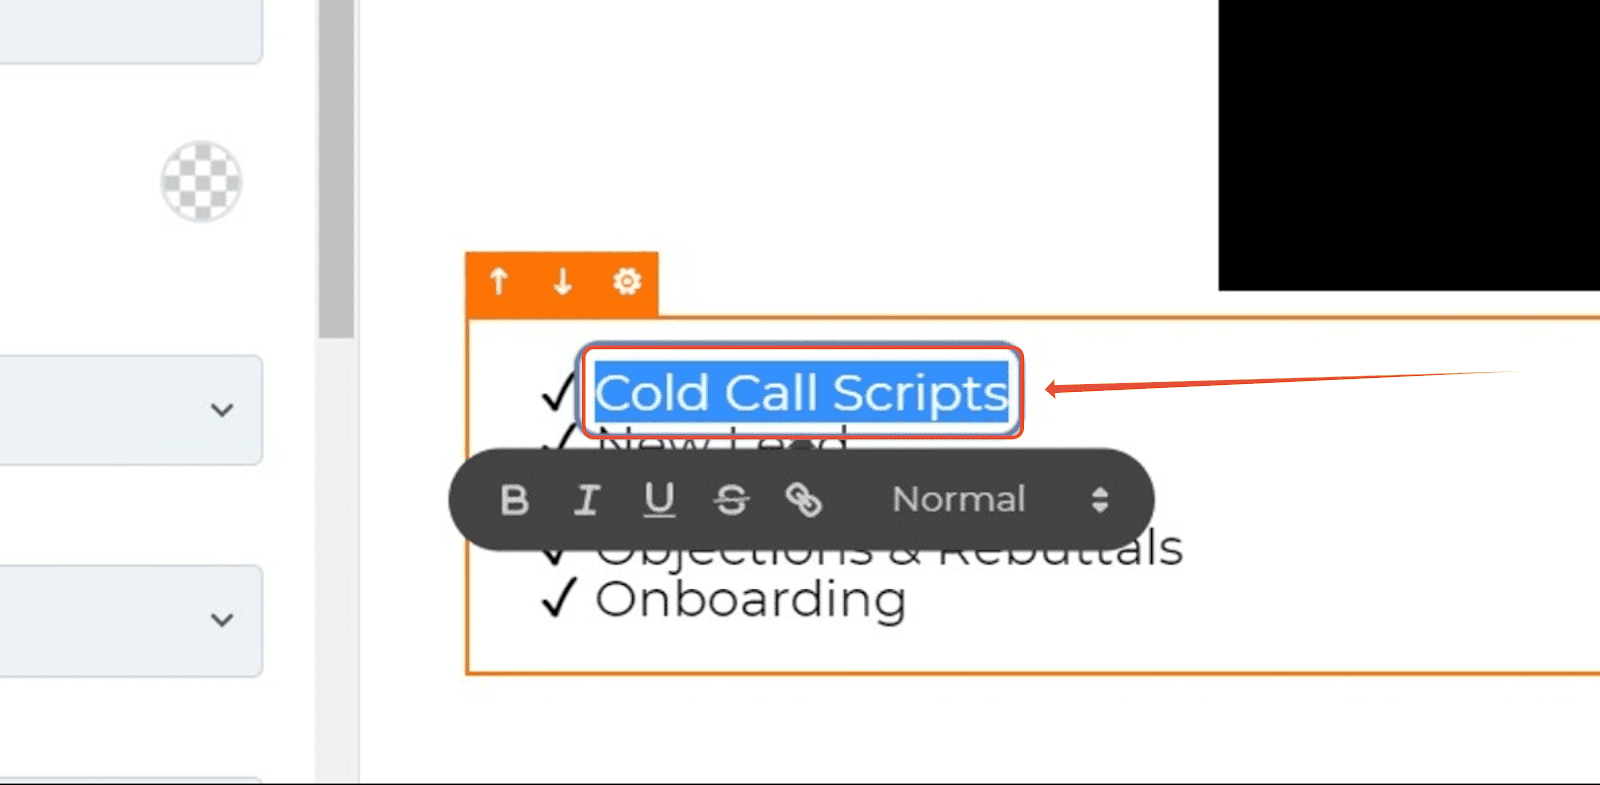 Drag highlighted text you wish to link your section too.